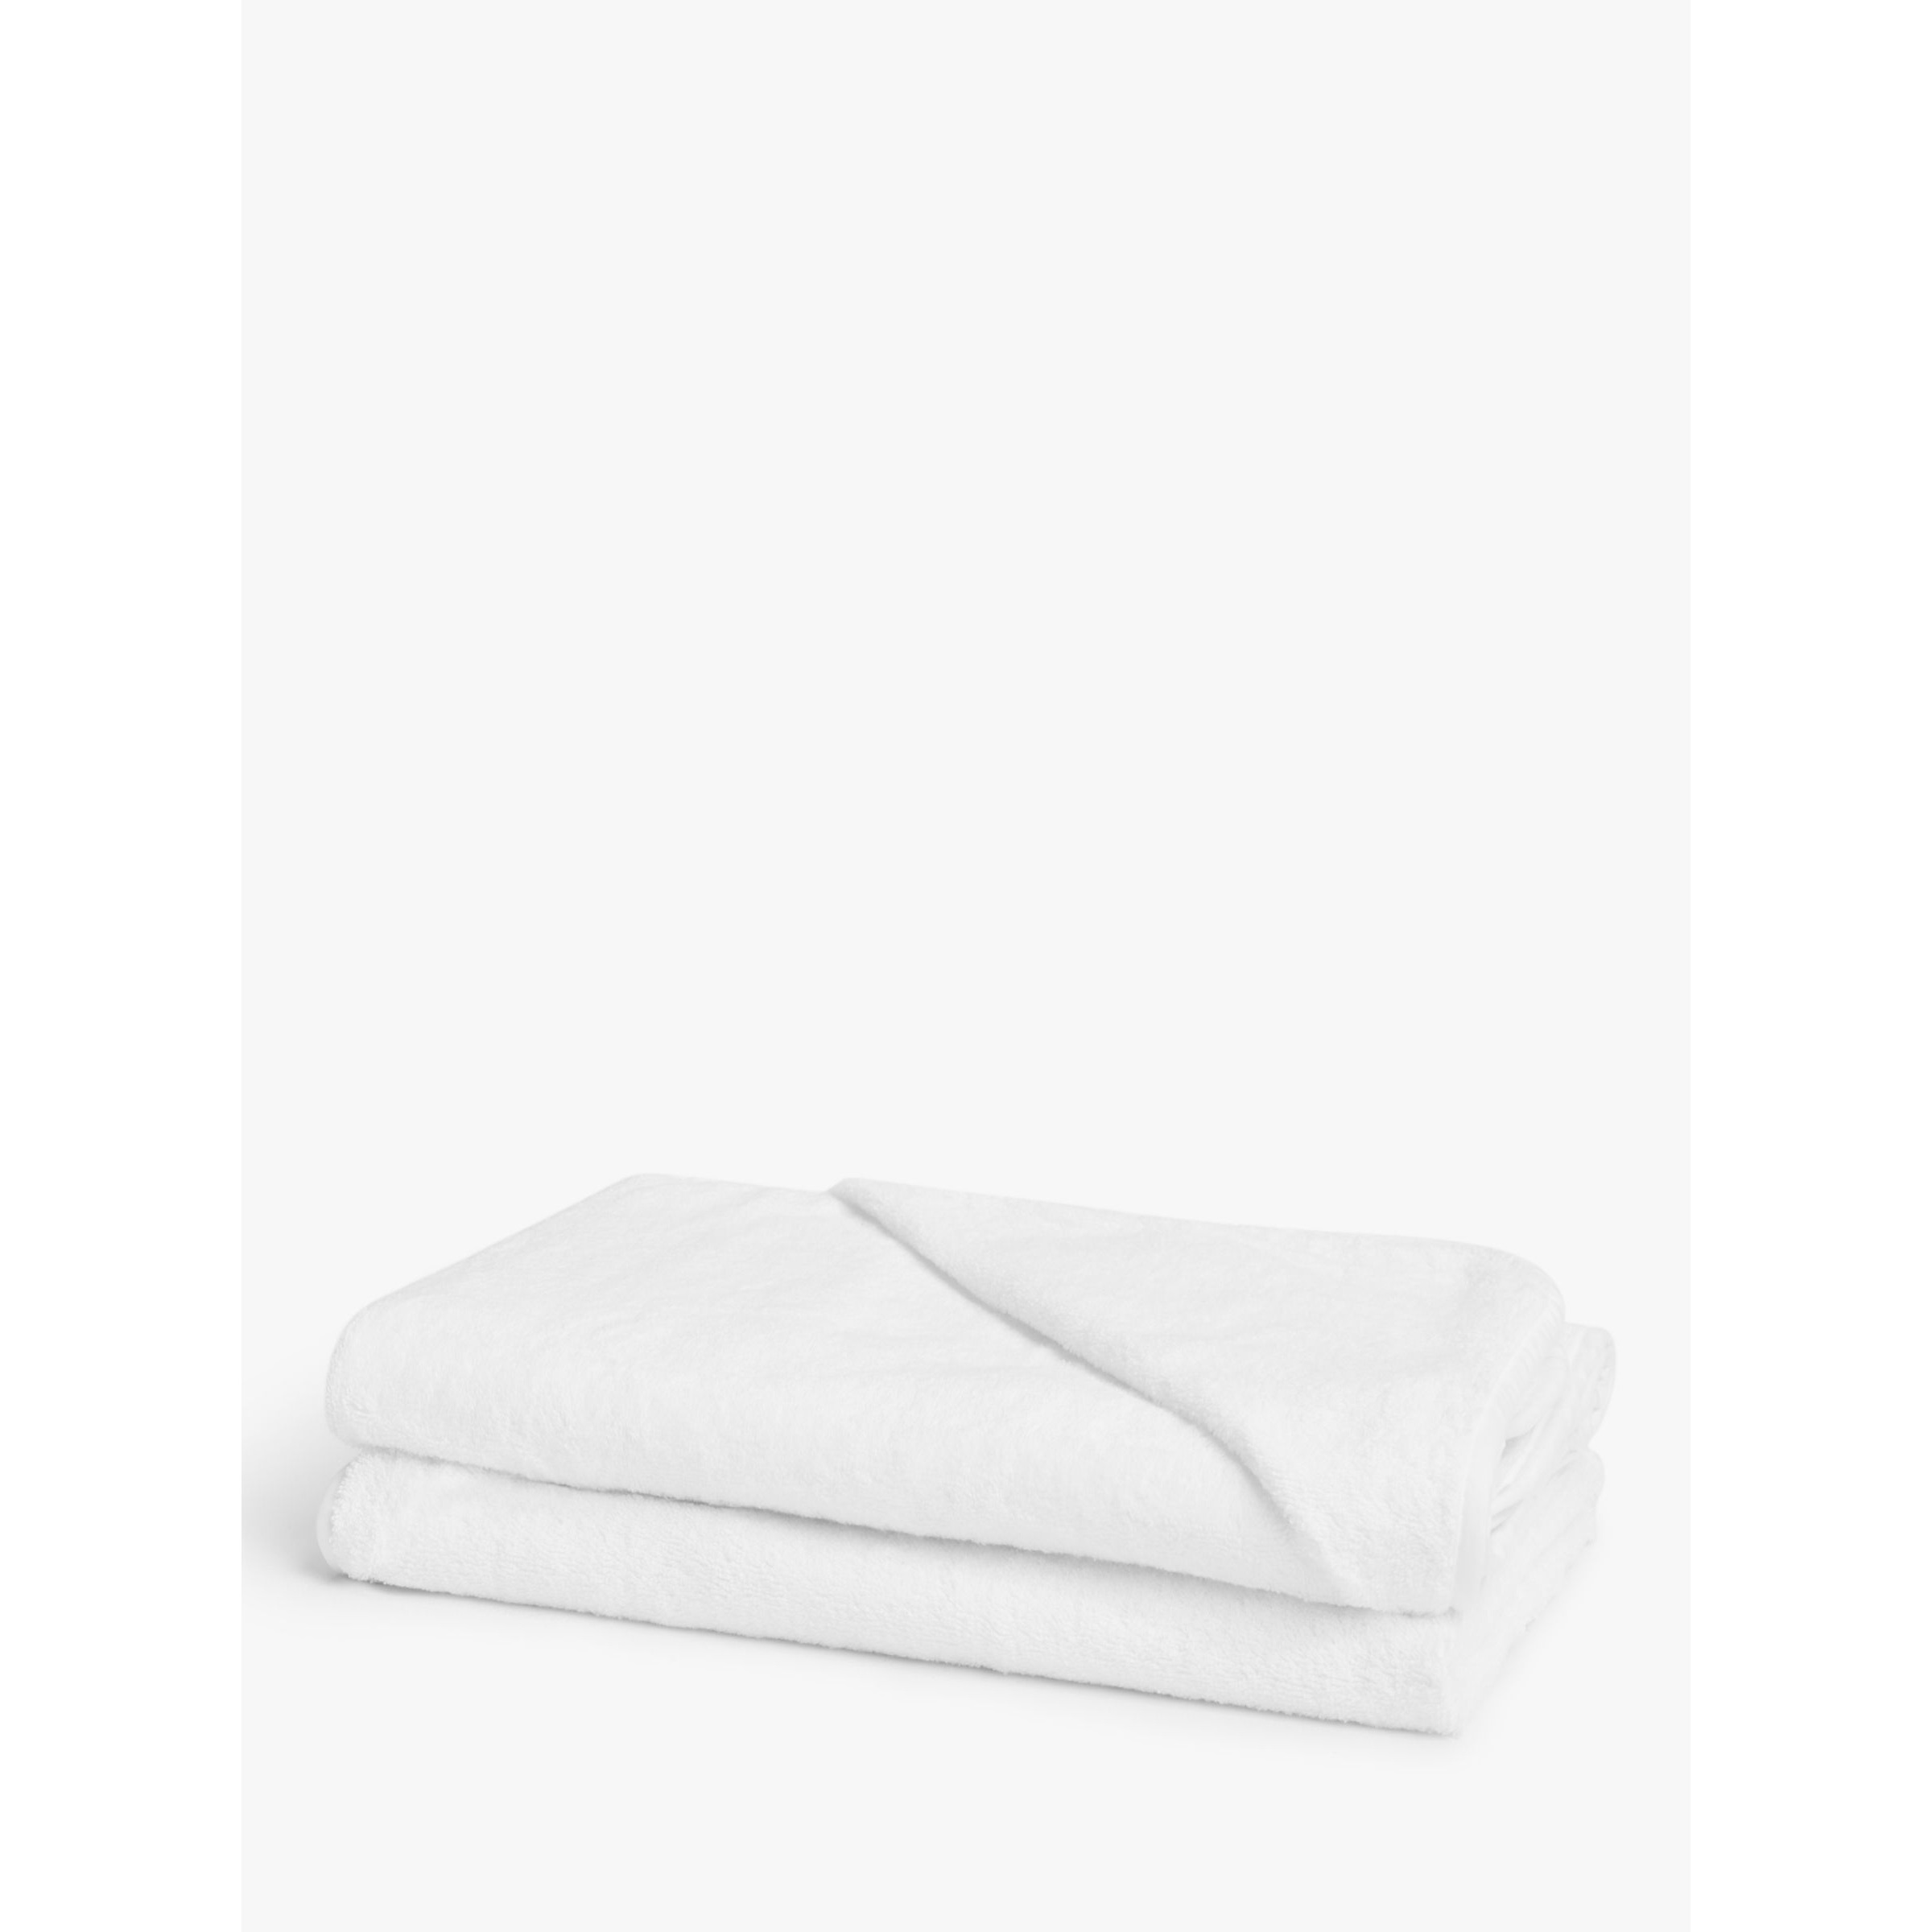 John Lewis ANYDAY Hooded Towels, Pack of 2, White - image 1